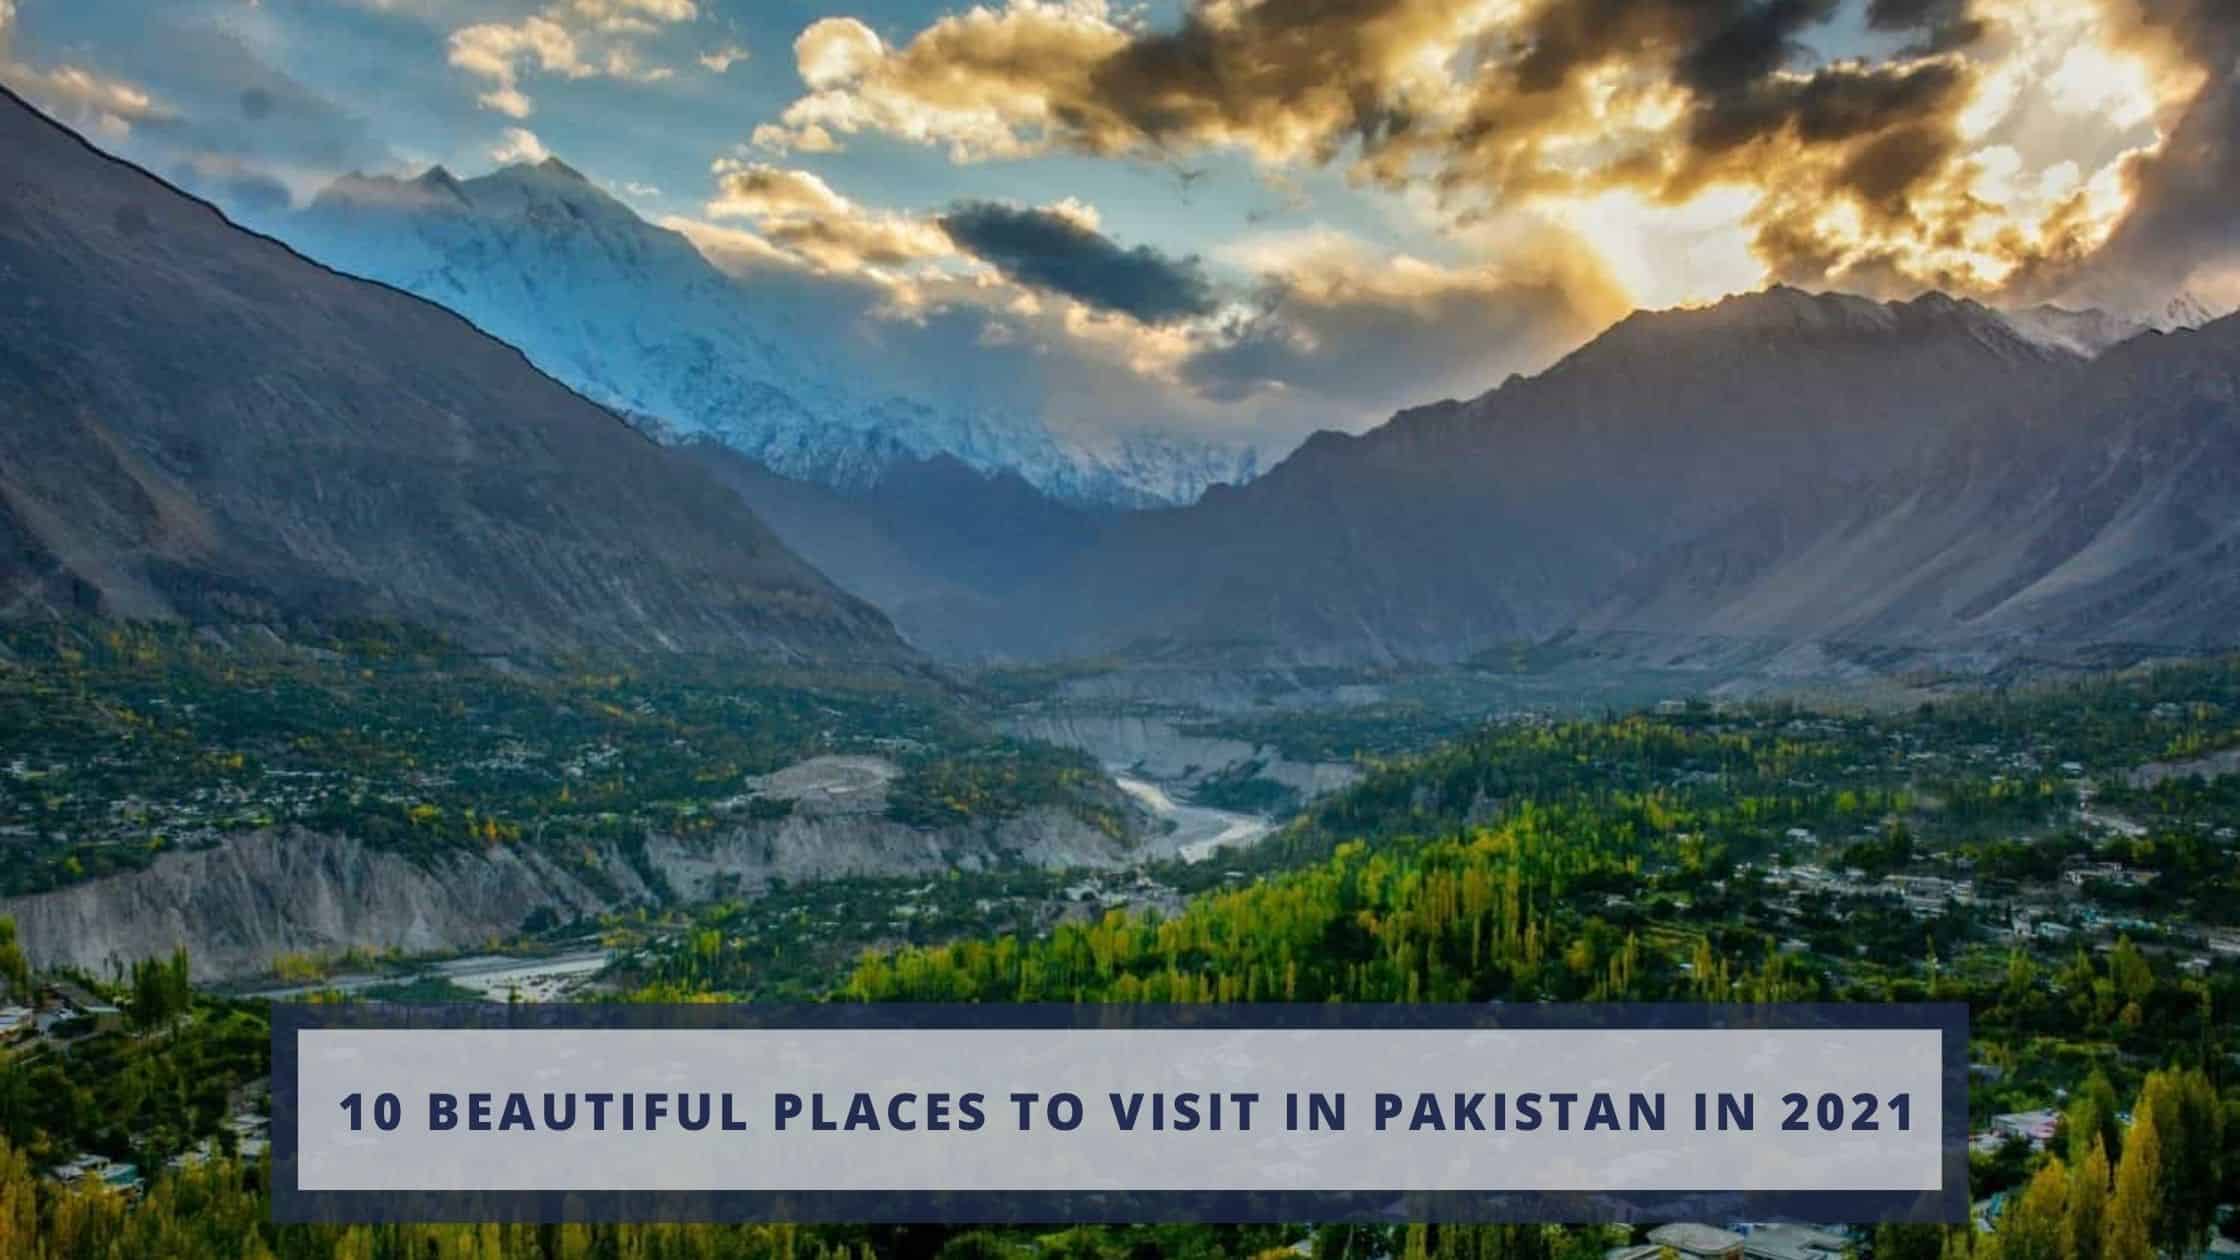 10 beautiful places to visit in Pakistan in 2021